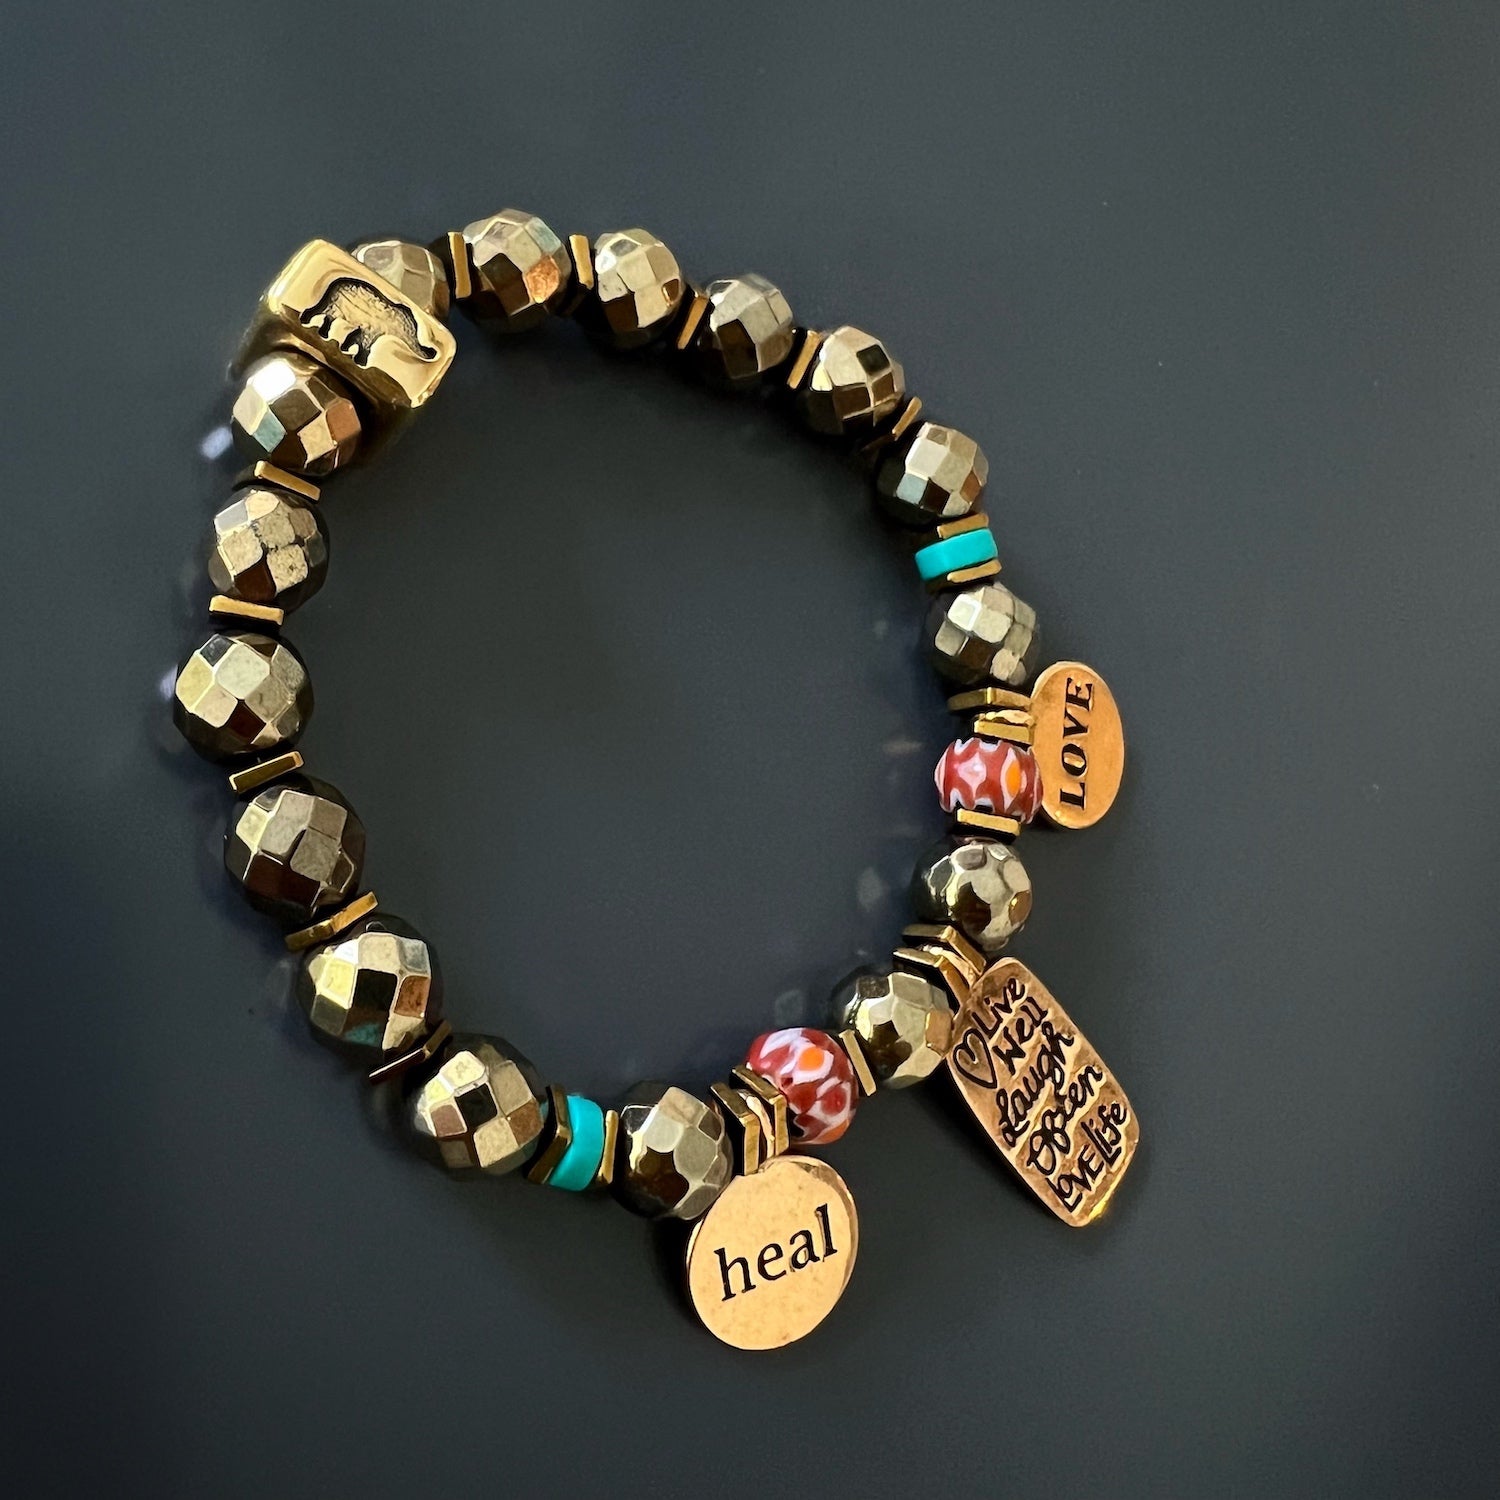 Experience the joy and beauty of the "Love Your Life" Bracelet, a meaningful piece designed to celebrate life and inspire love.